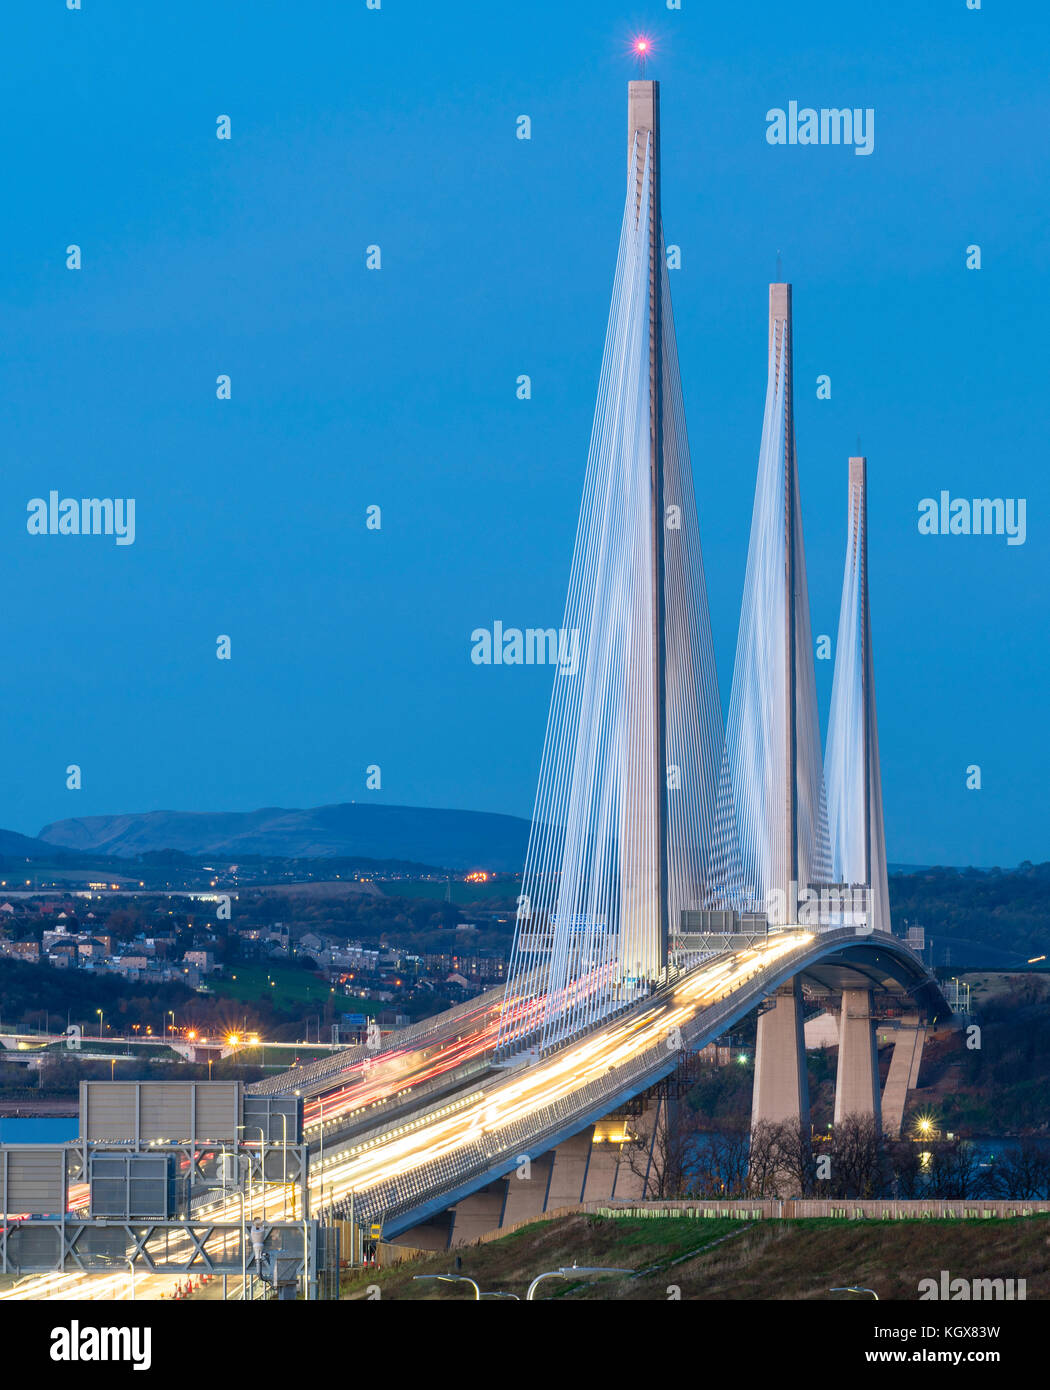 Night view of new Queensferry Crossing Bridge spanning the Firth of Forth in Scotland, United Kingdom Stock Photo